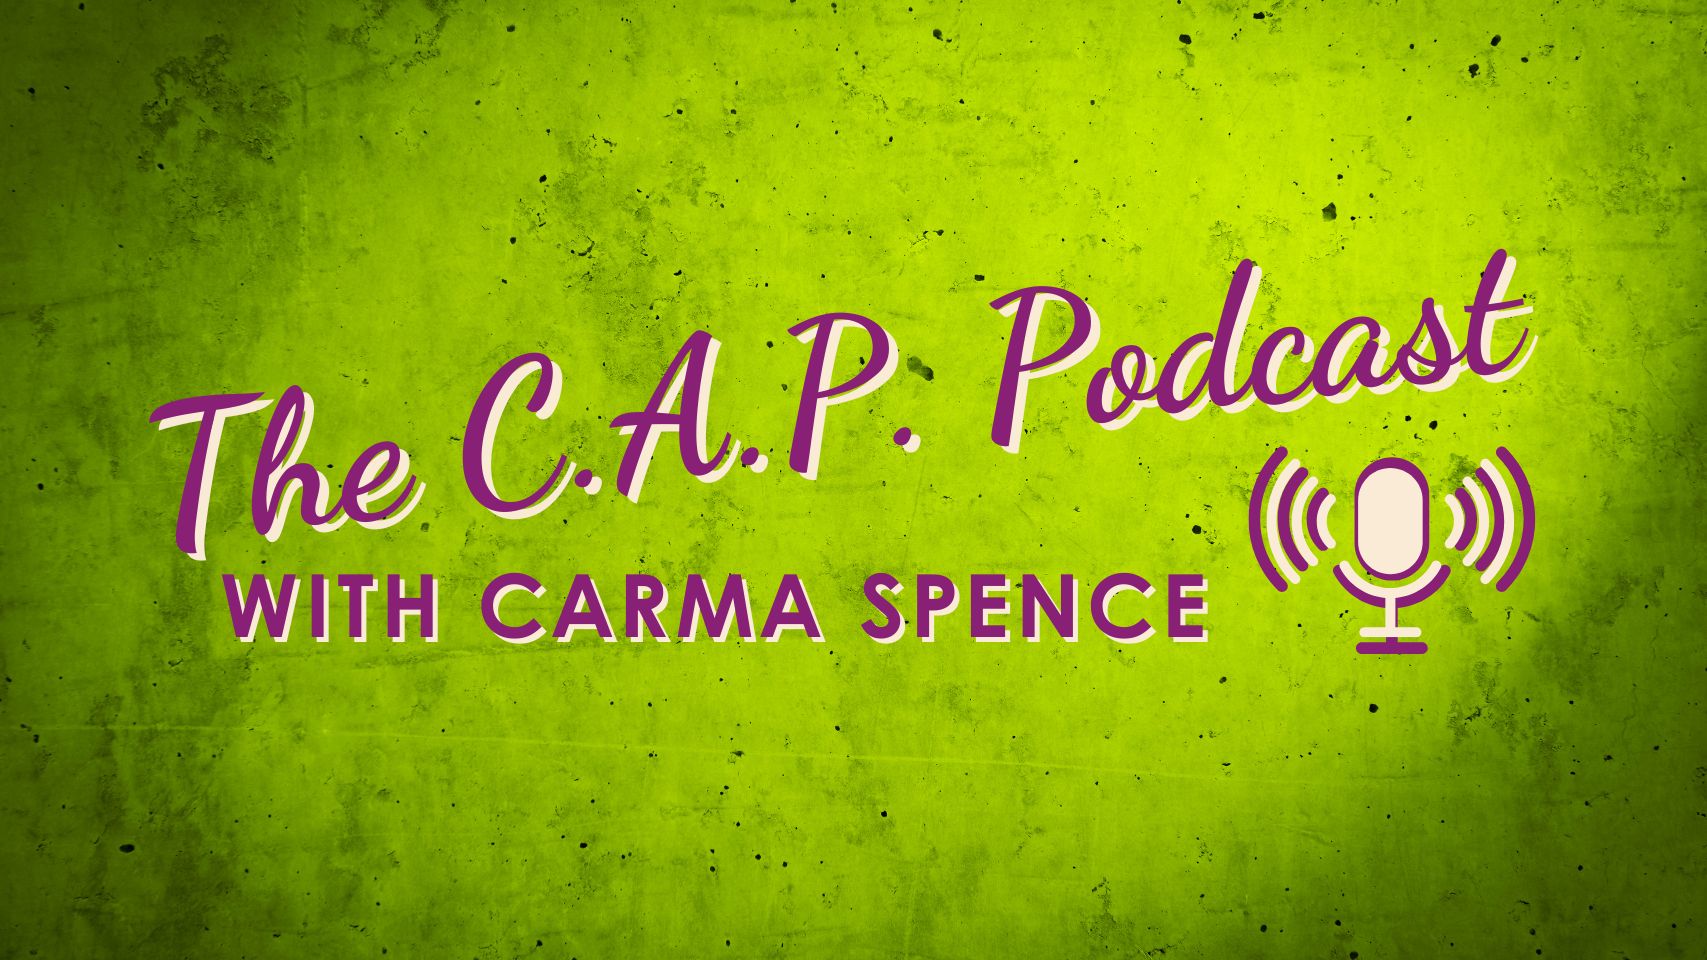 The C.A.P. Podcast